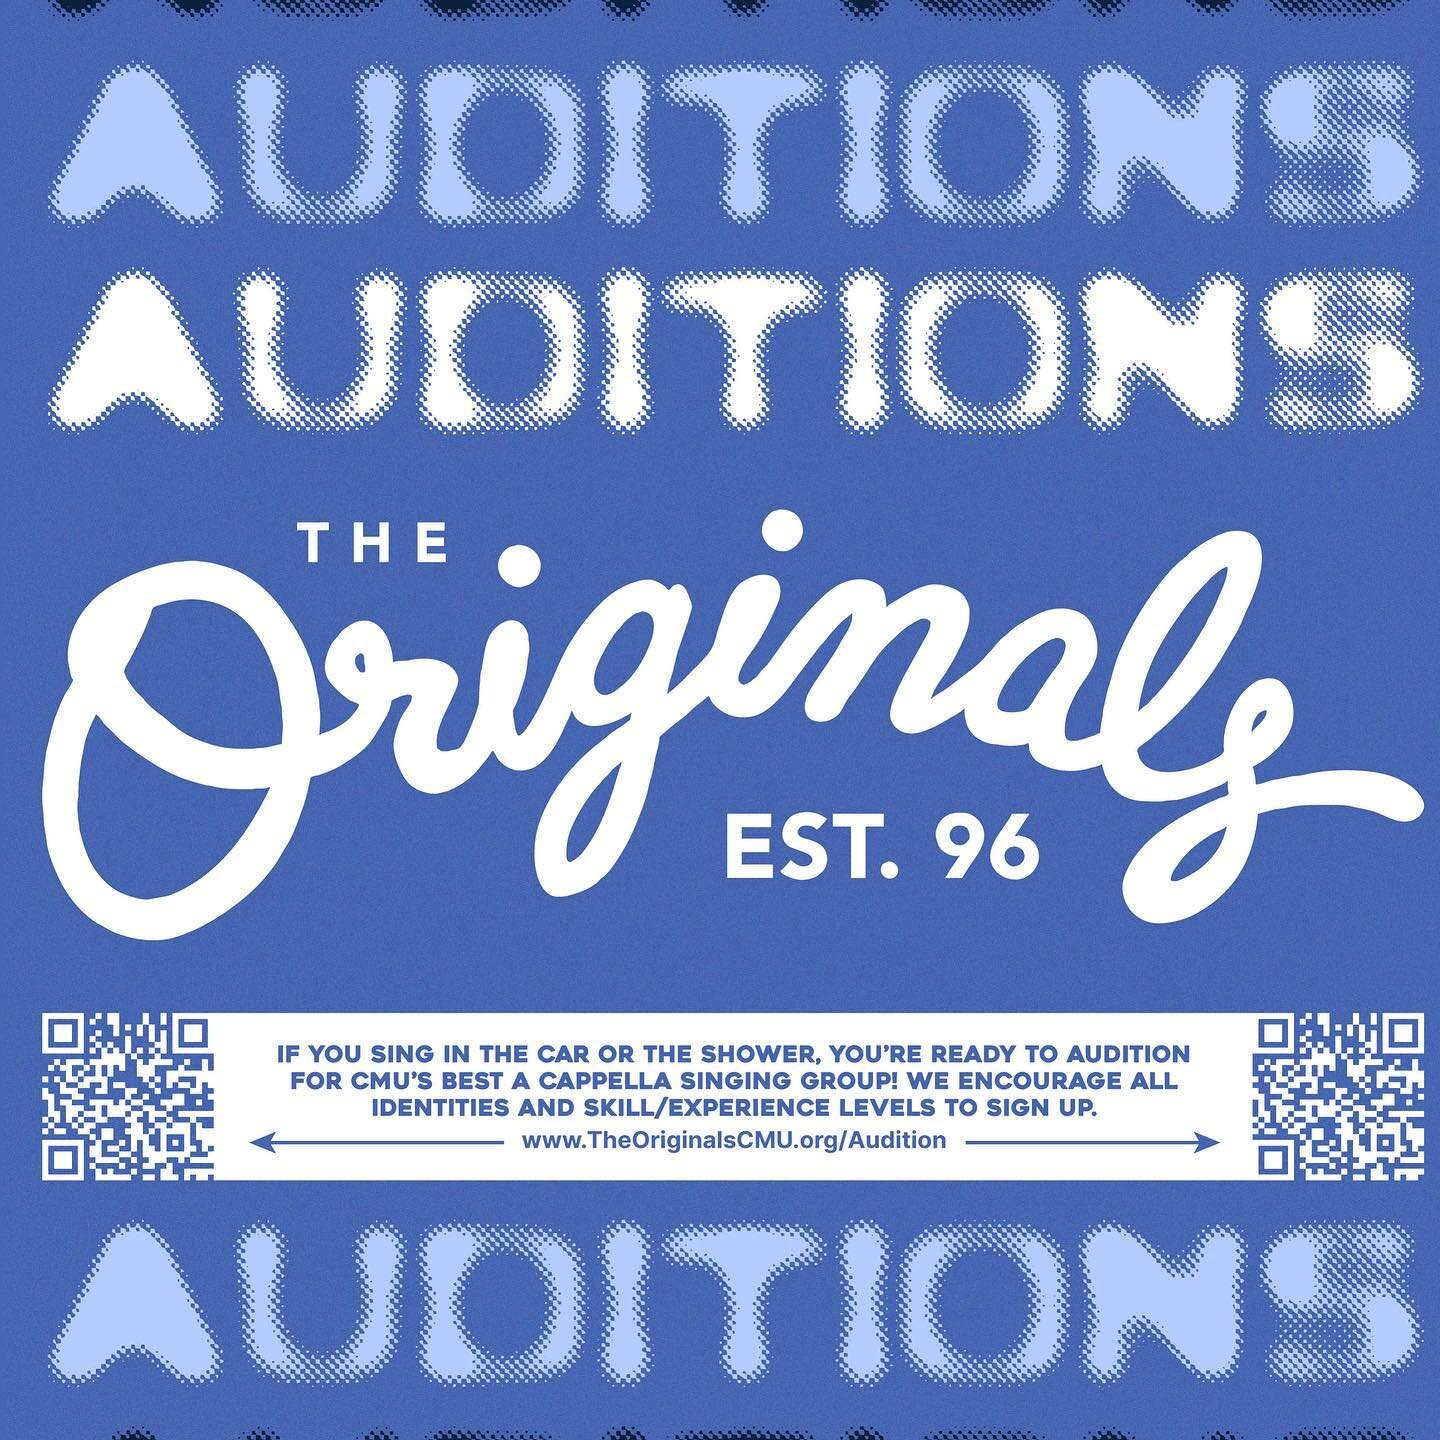 It&rsquo;s that time of the year! If you love to sing, come audition for The Original&rsquo;s on Feb 2 or 3!! We are CMU&rsquo;s Oldest Lower-Voice Part group on campus🎵